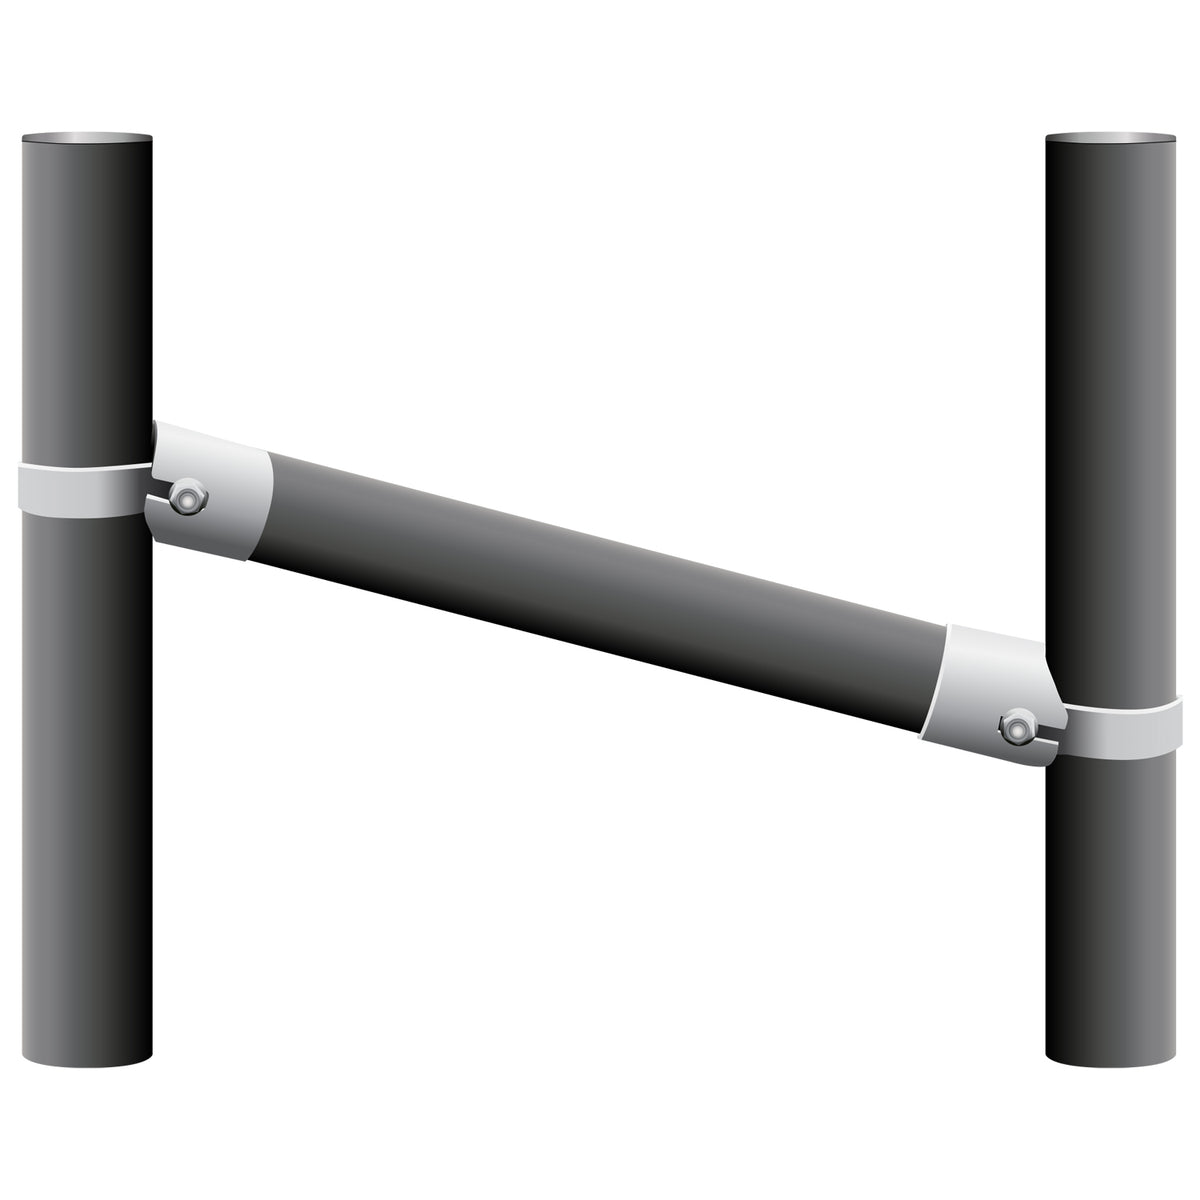 Bullet Fence Systems Pipe N Brace Kit. Install your fence post angle brace today, buy your kit online. 